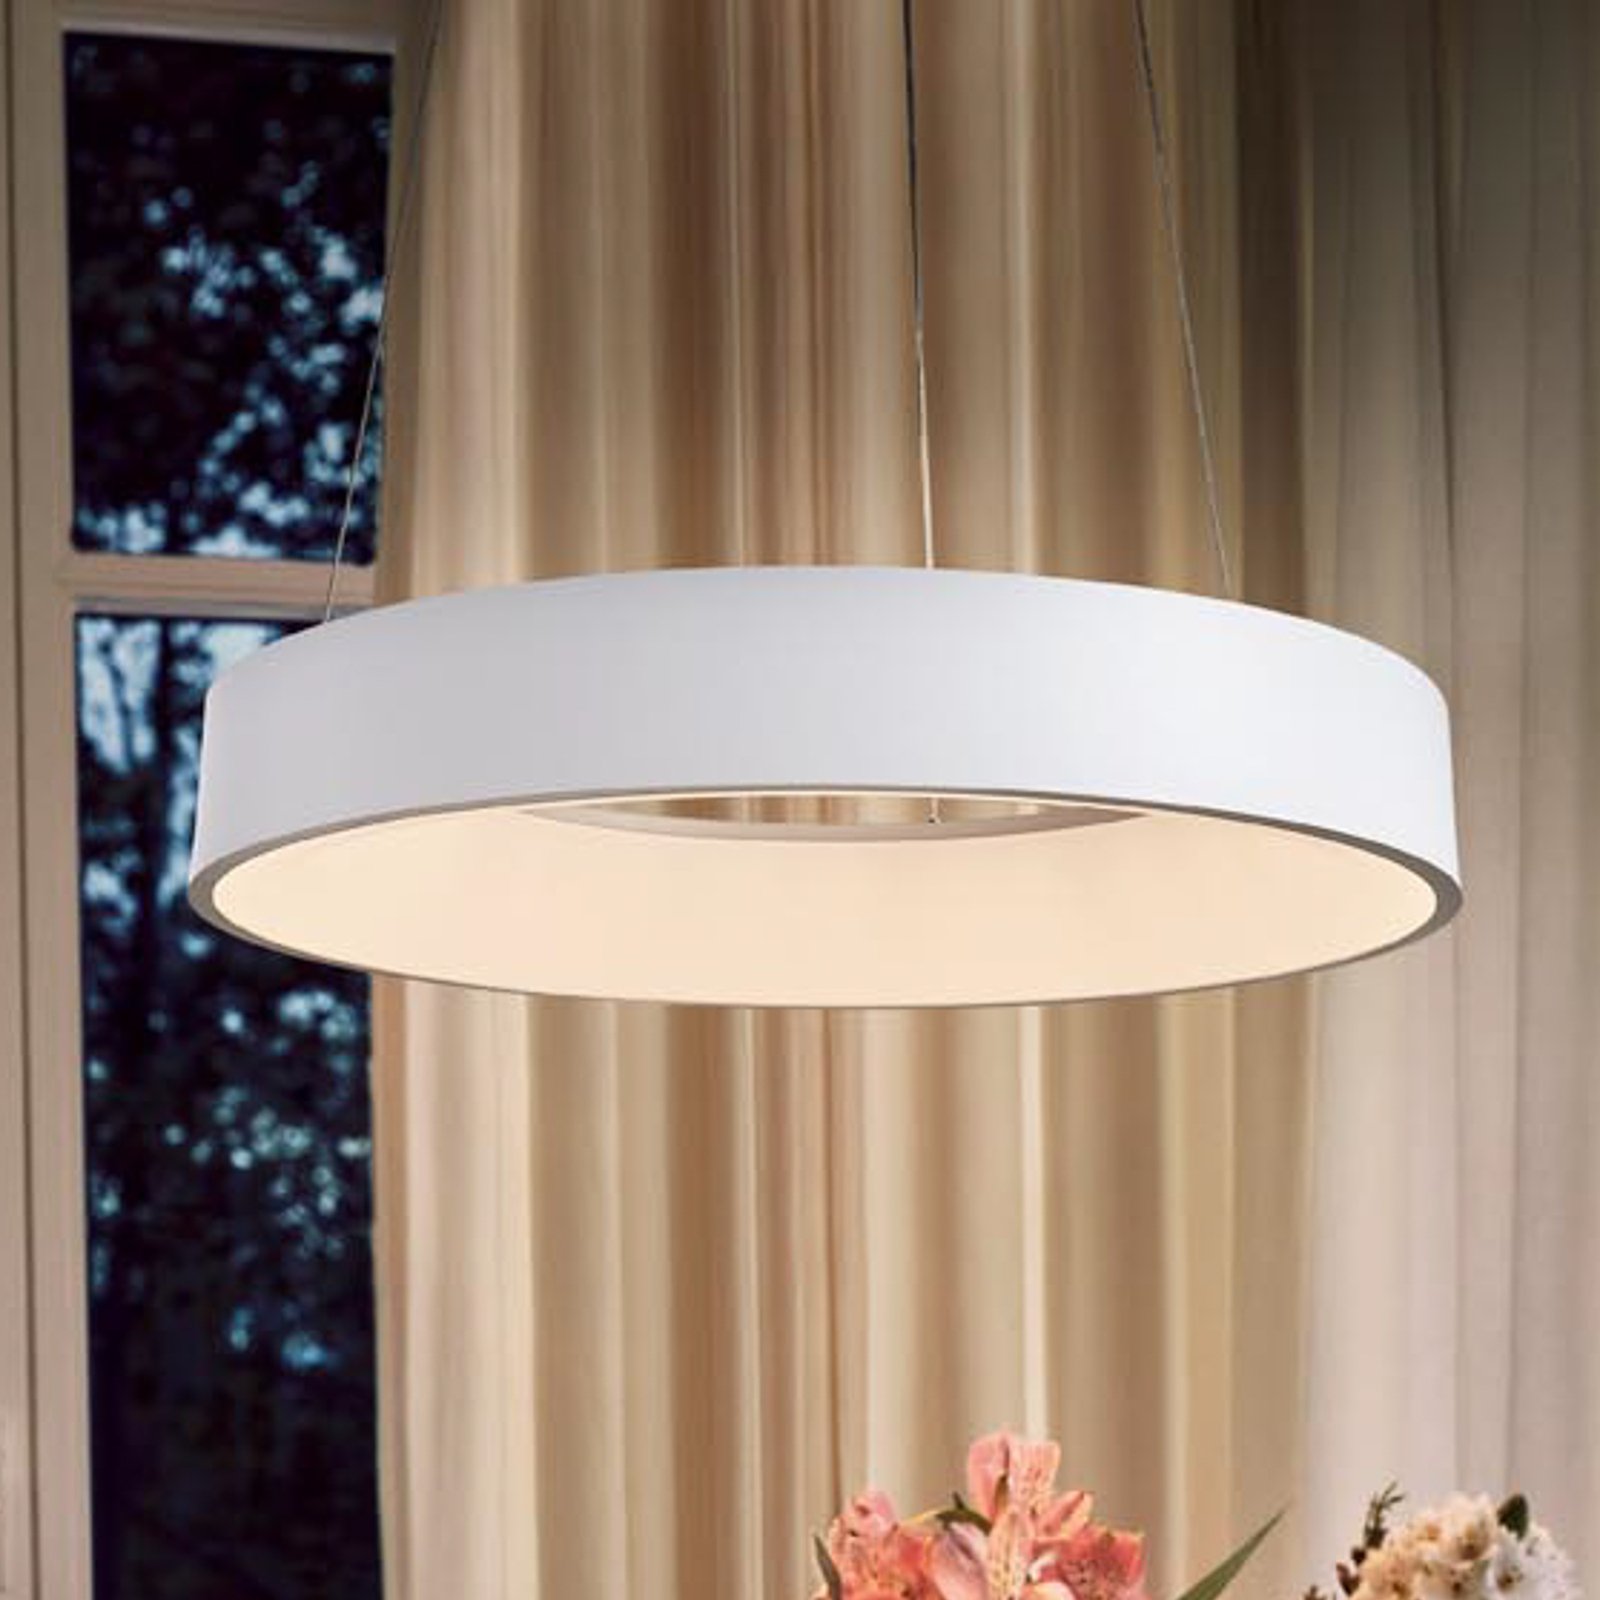 LEDVANCE SUN@Home Circulaire LED hanglamp wit